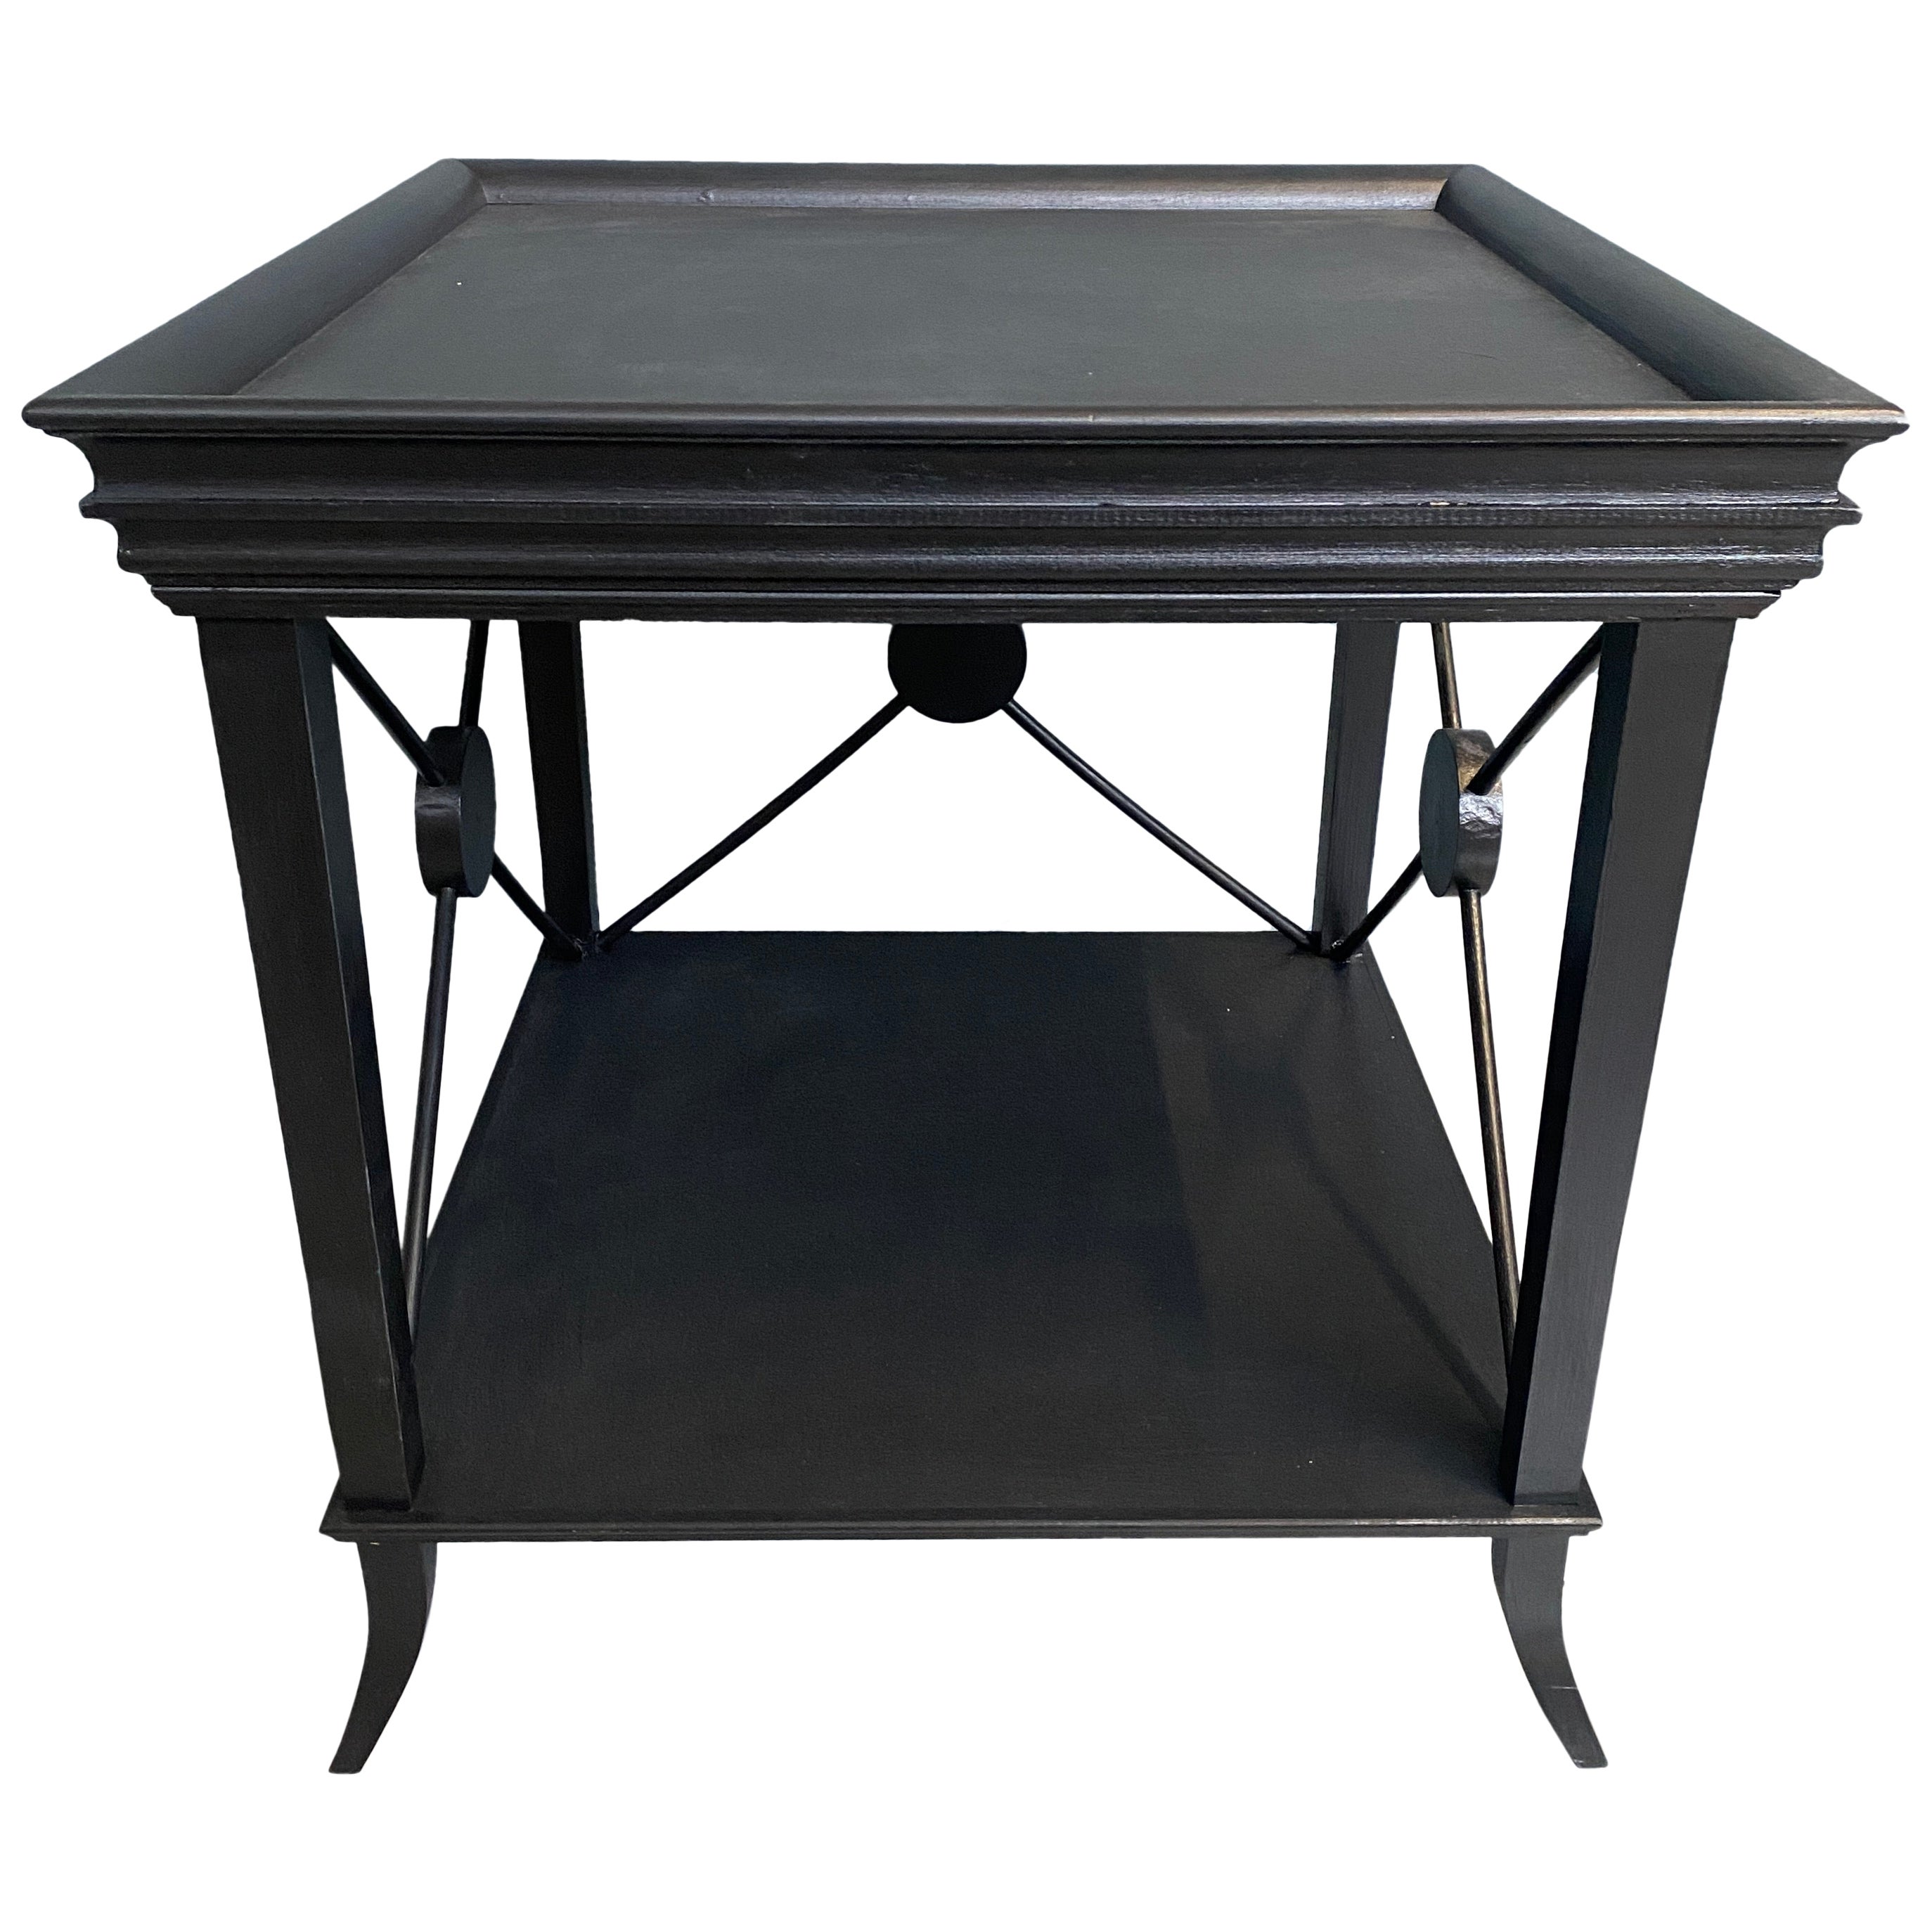 Italian Contemporary  Black Lacquered Wood Side Table with Wood Finishes